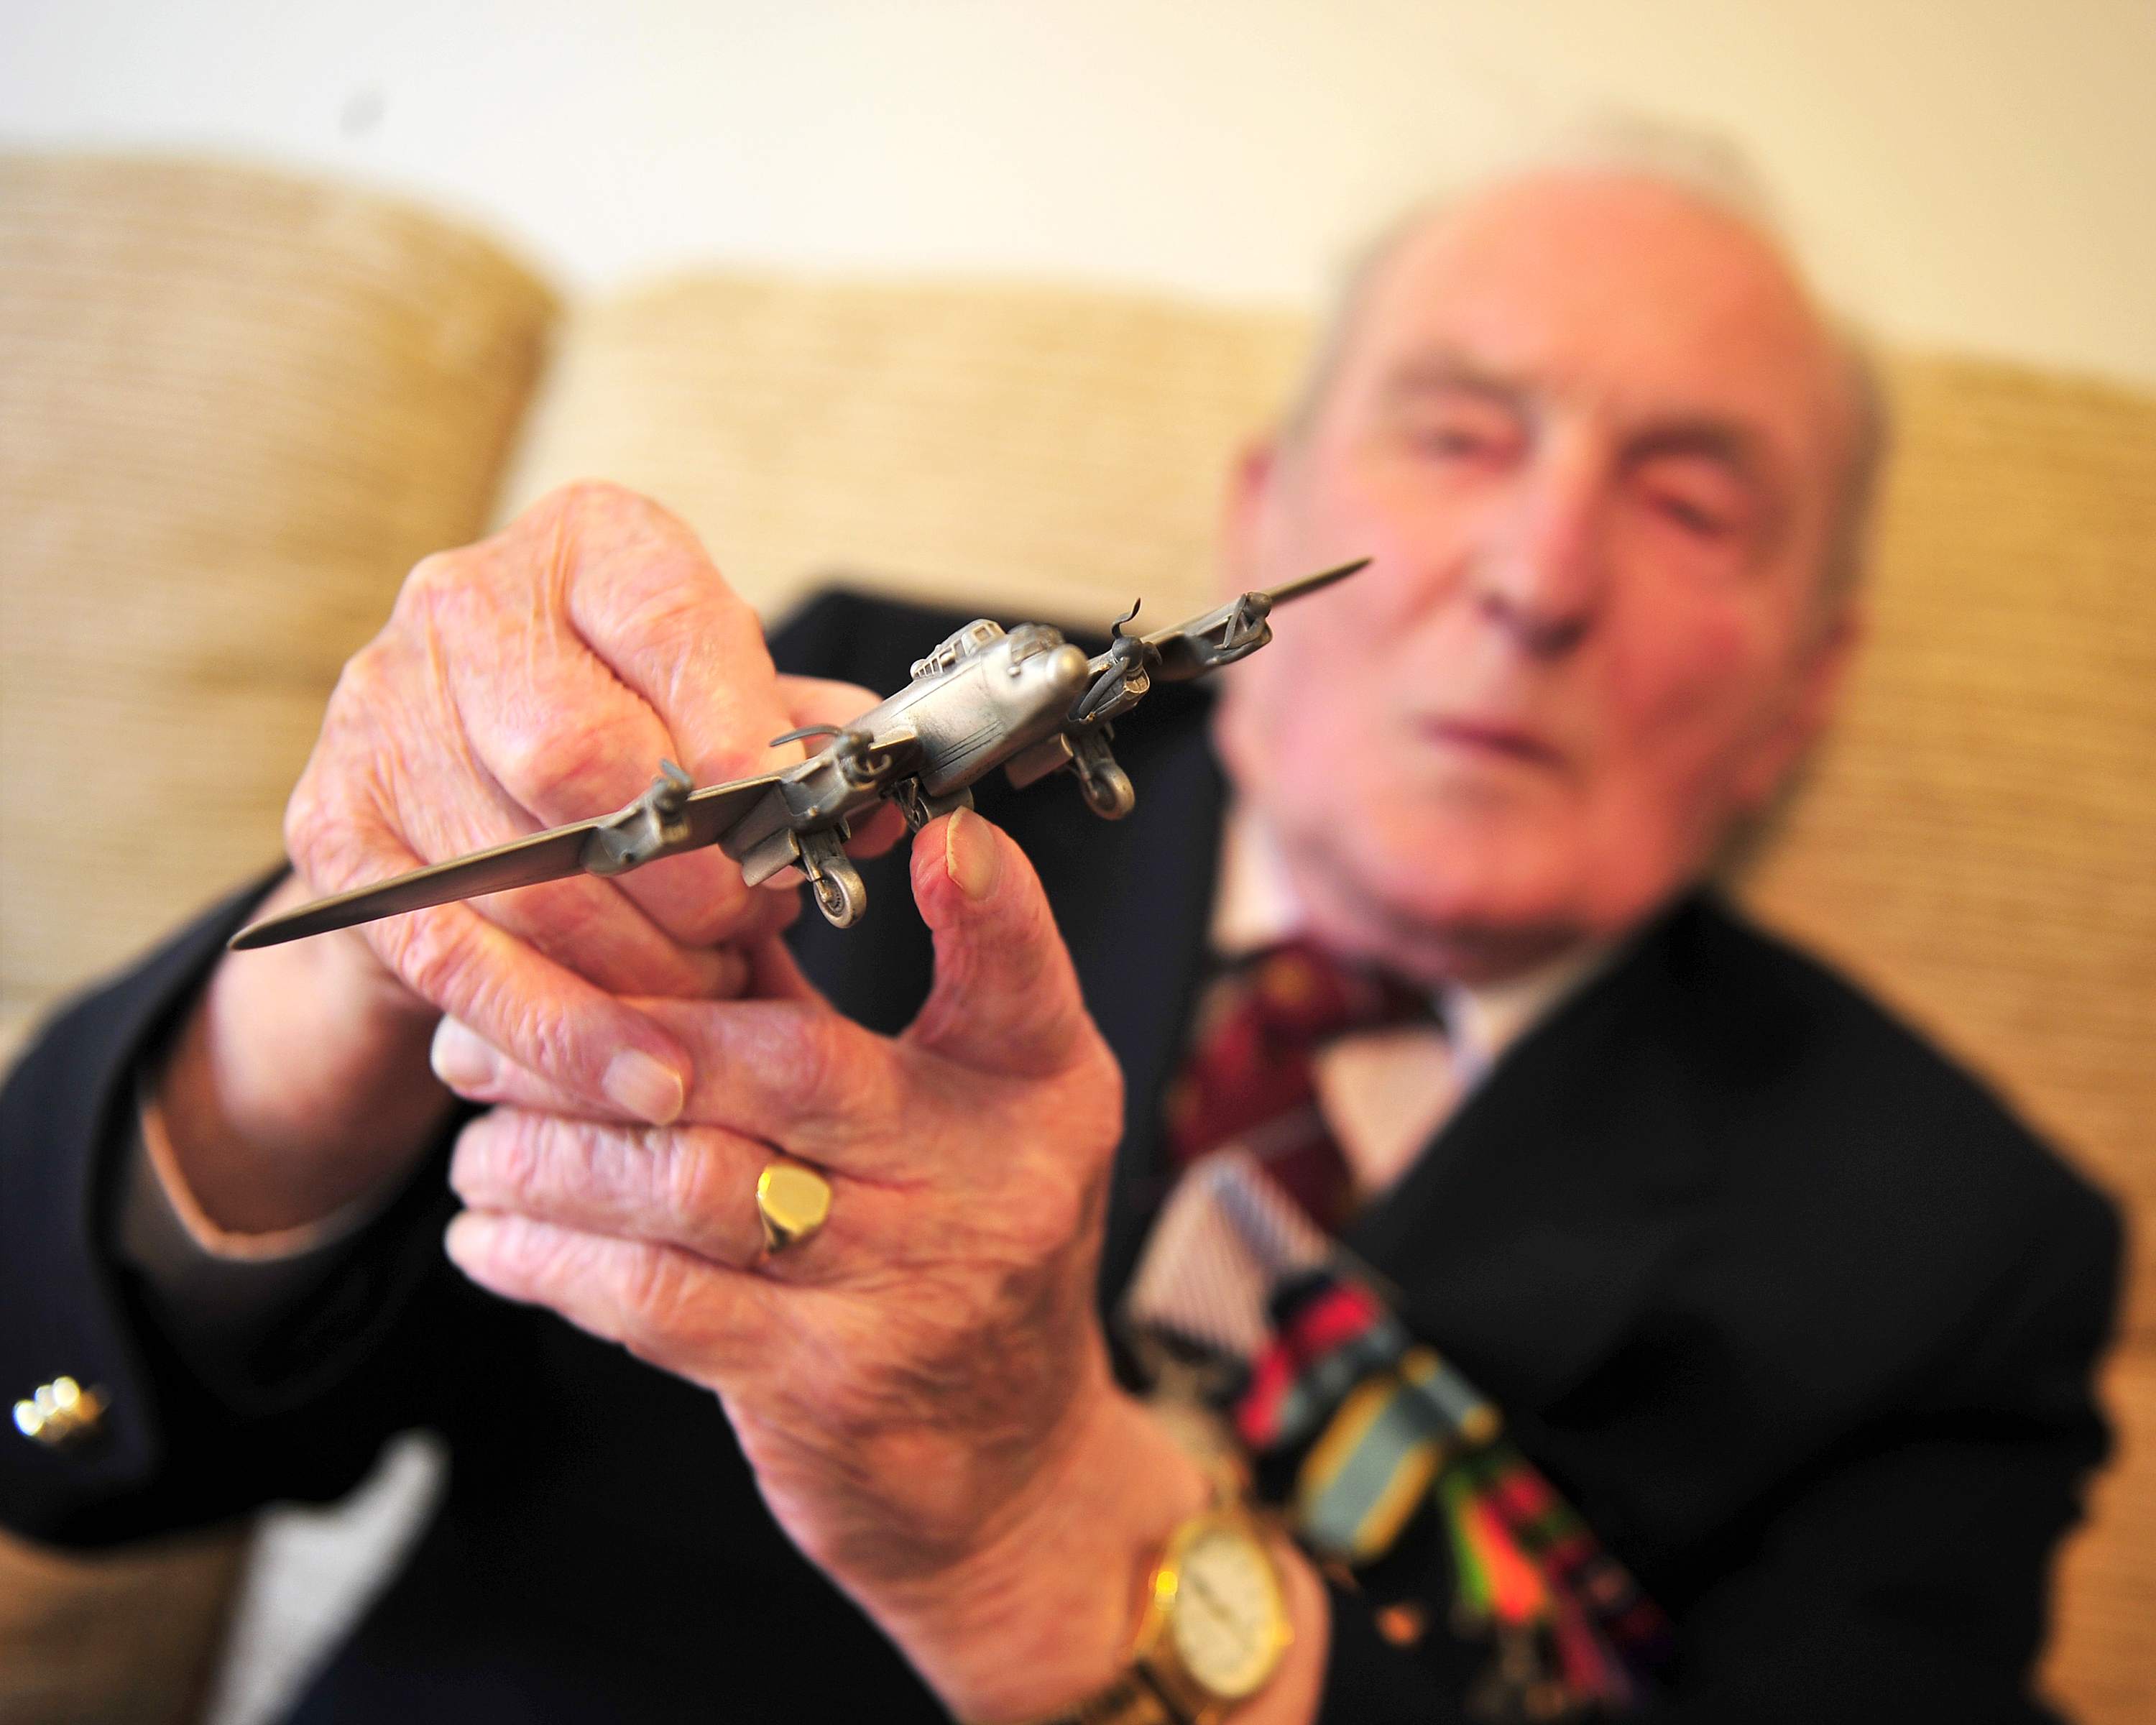 Johnny holds a model Lancaster Aircraft to the camera.